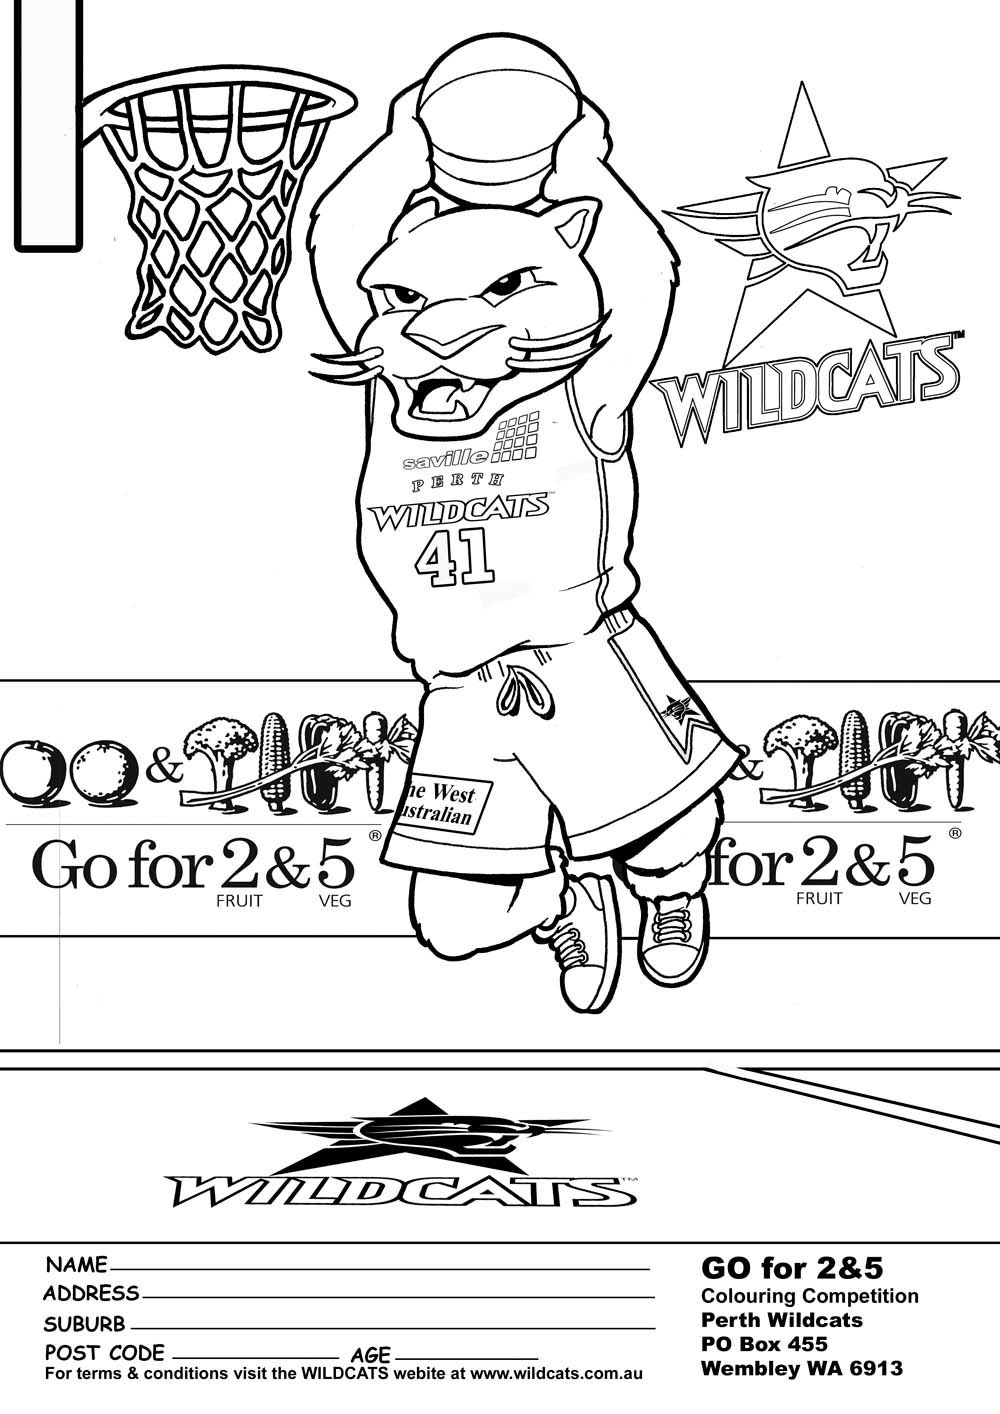 Best Photos of UK Wildcats Basketball Coloring Pages - UK Wildcats ...